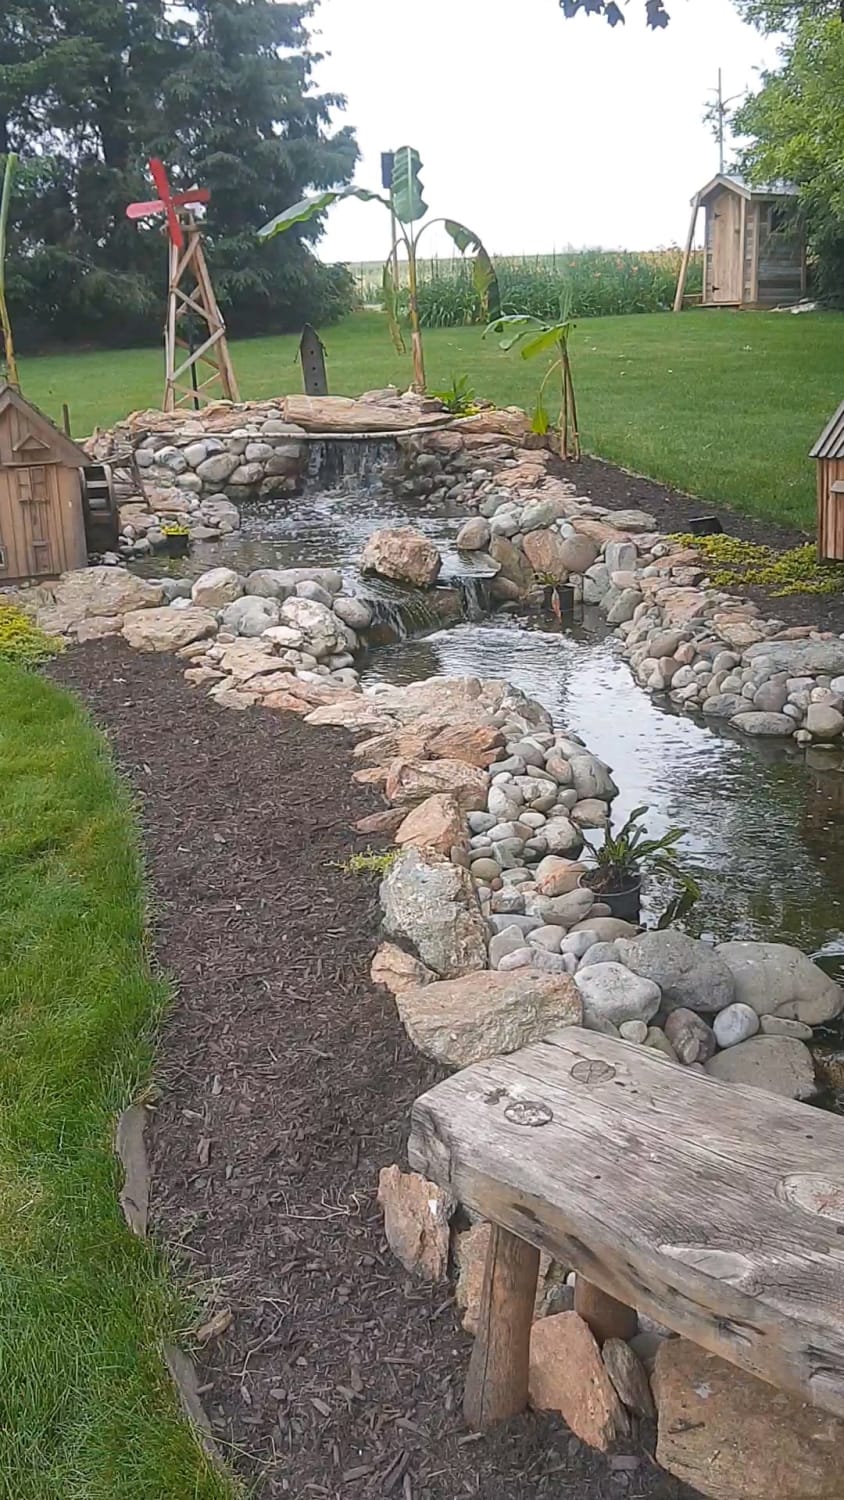 FiL retired recently and decided to do a fully functional stream in the backyard including all the woodworking